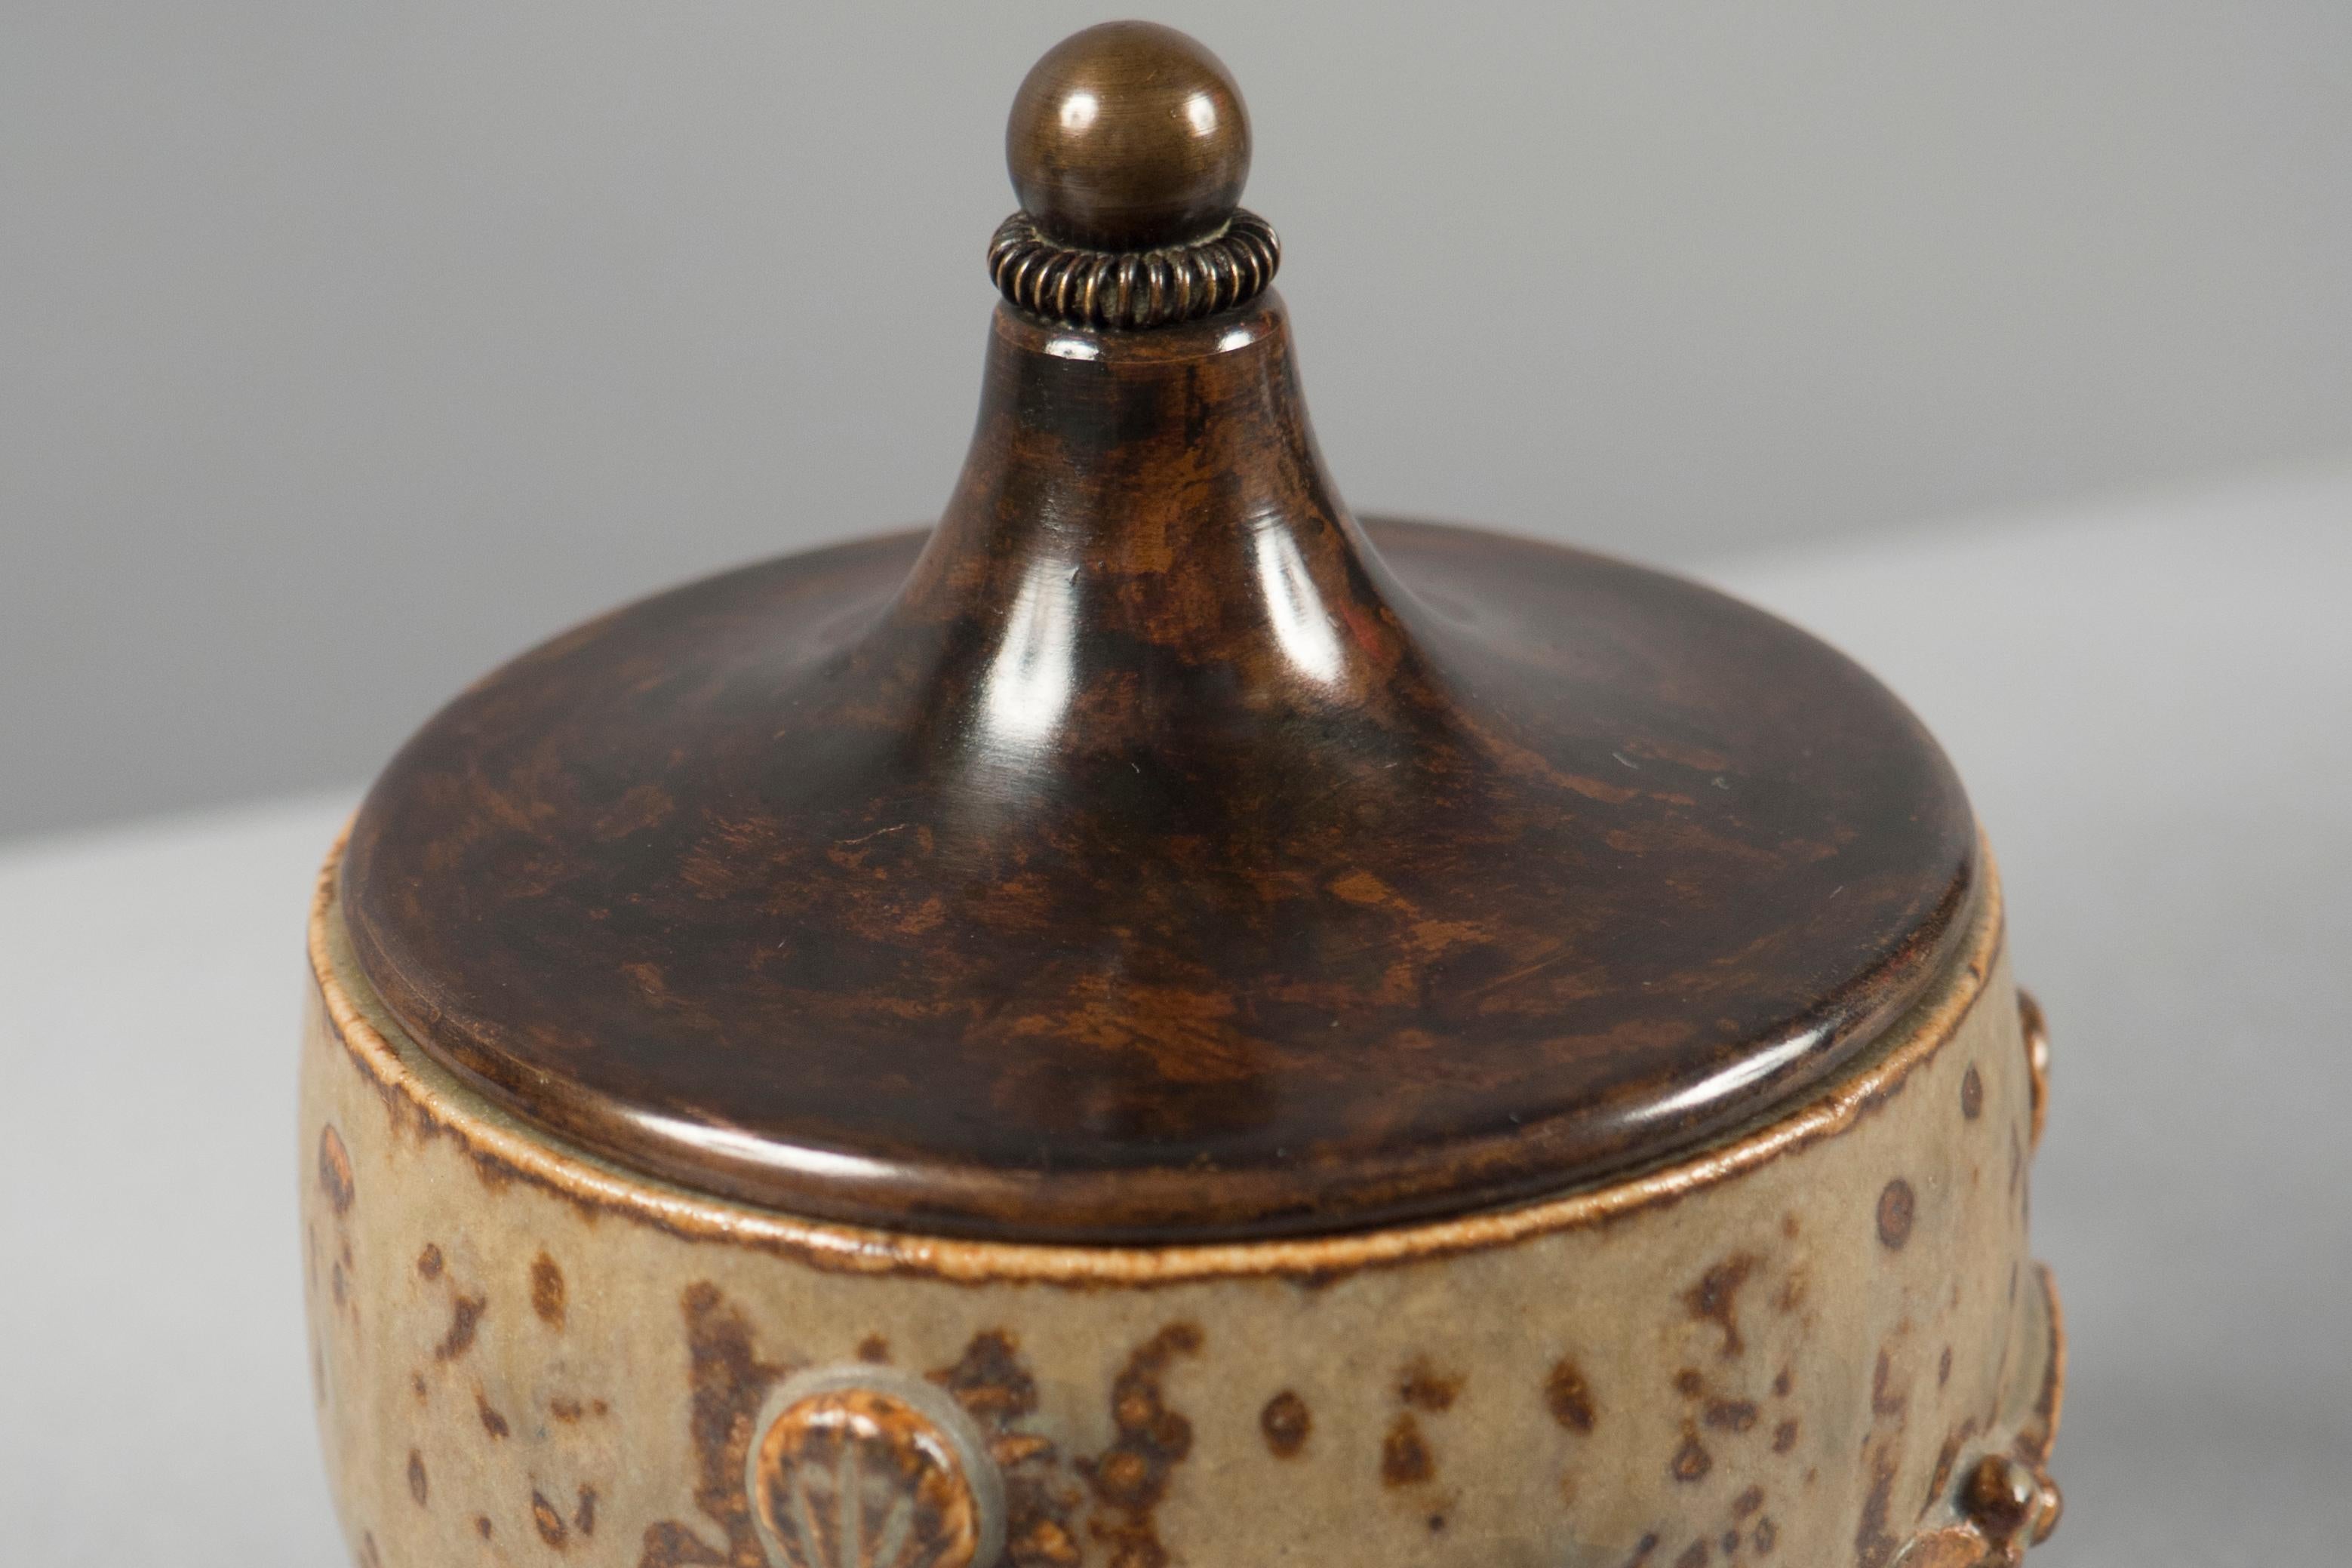 Brown glazed vessel with dark brown speckles with a raised floral motif throughout a patinated bronze lid tops it.